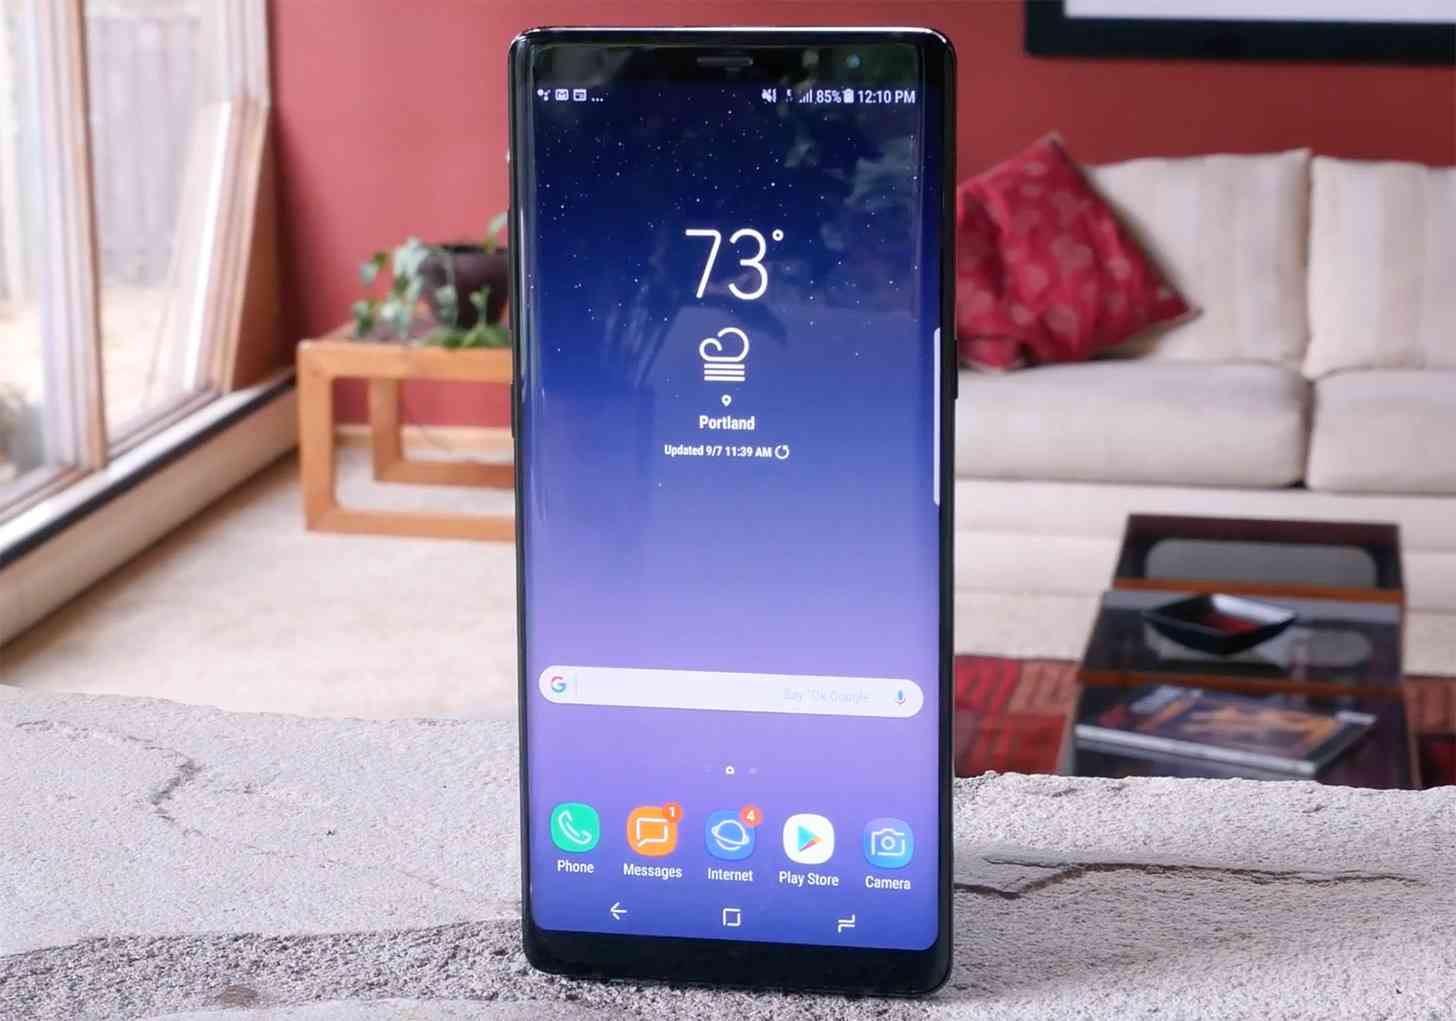 Samsung Galaxy Note 8 hands-on video review